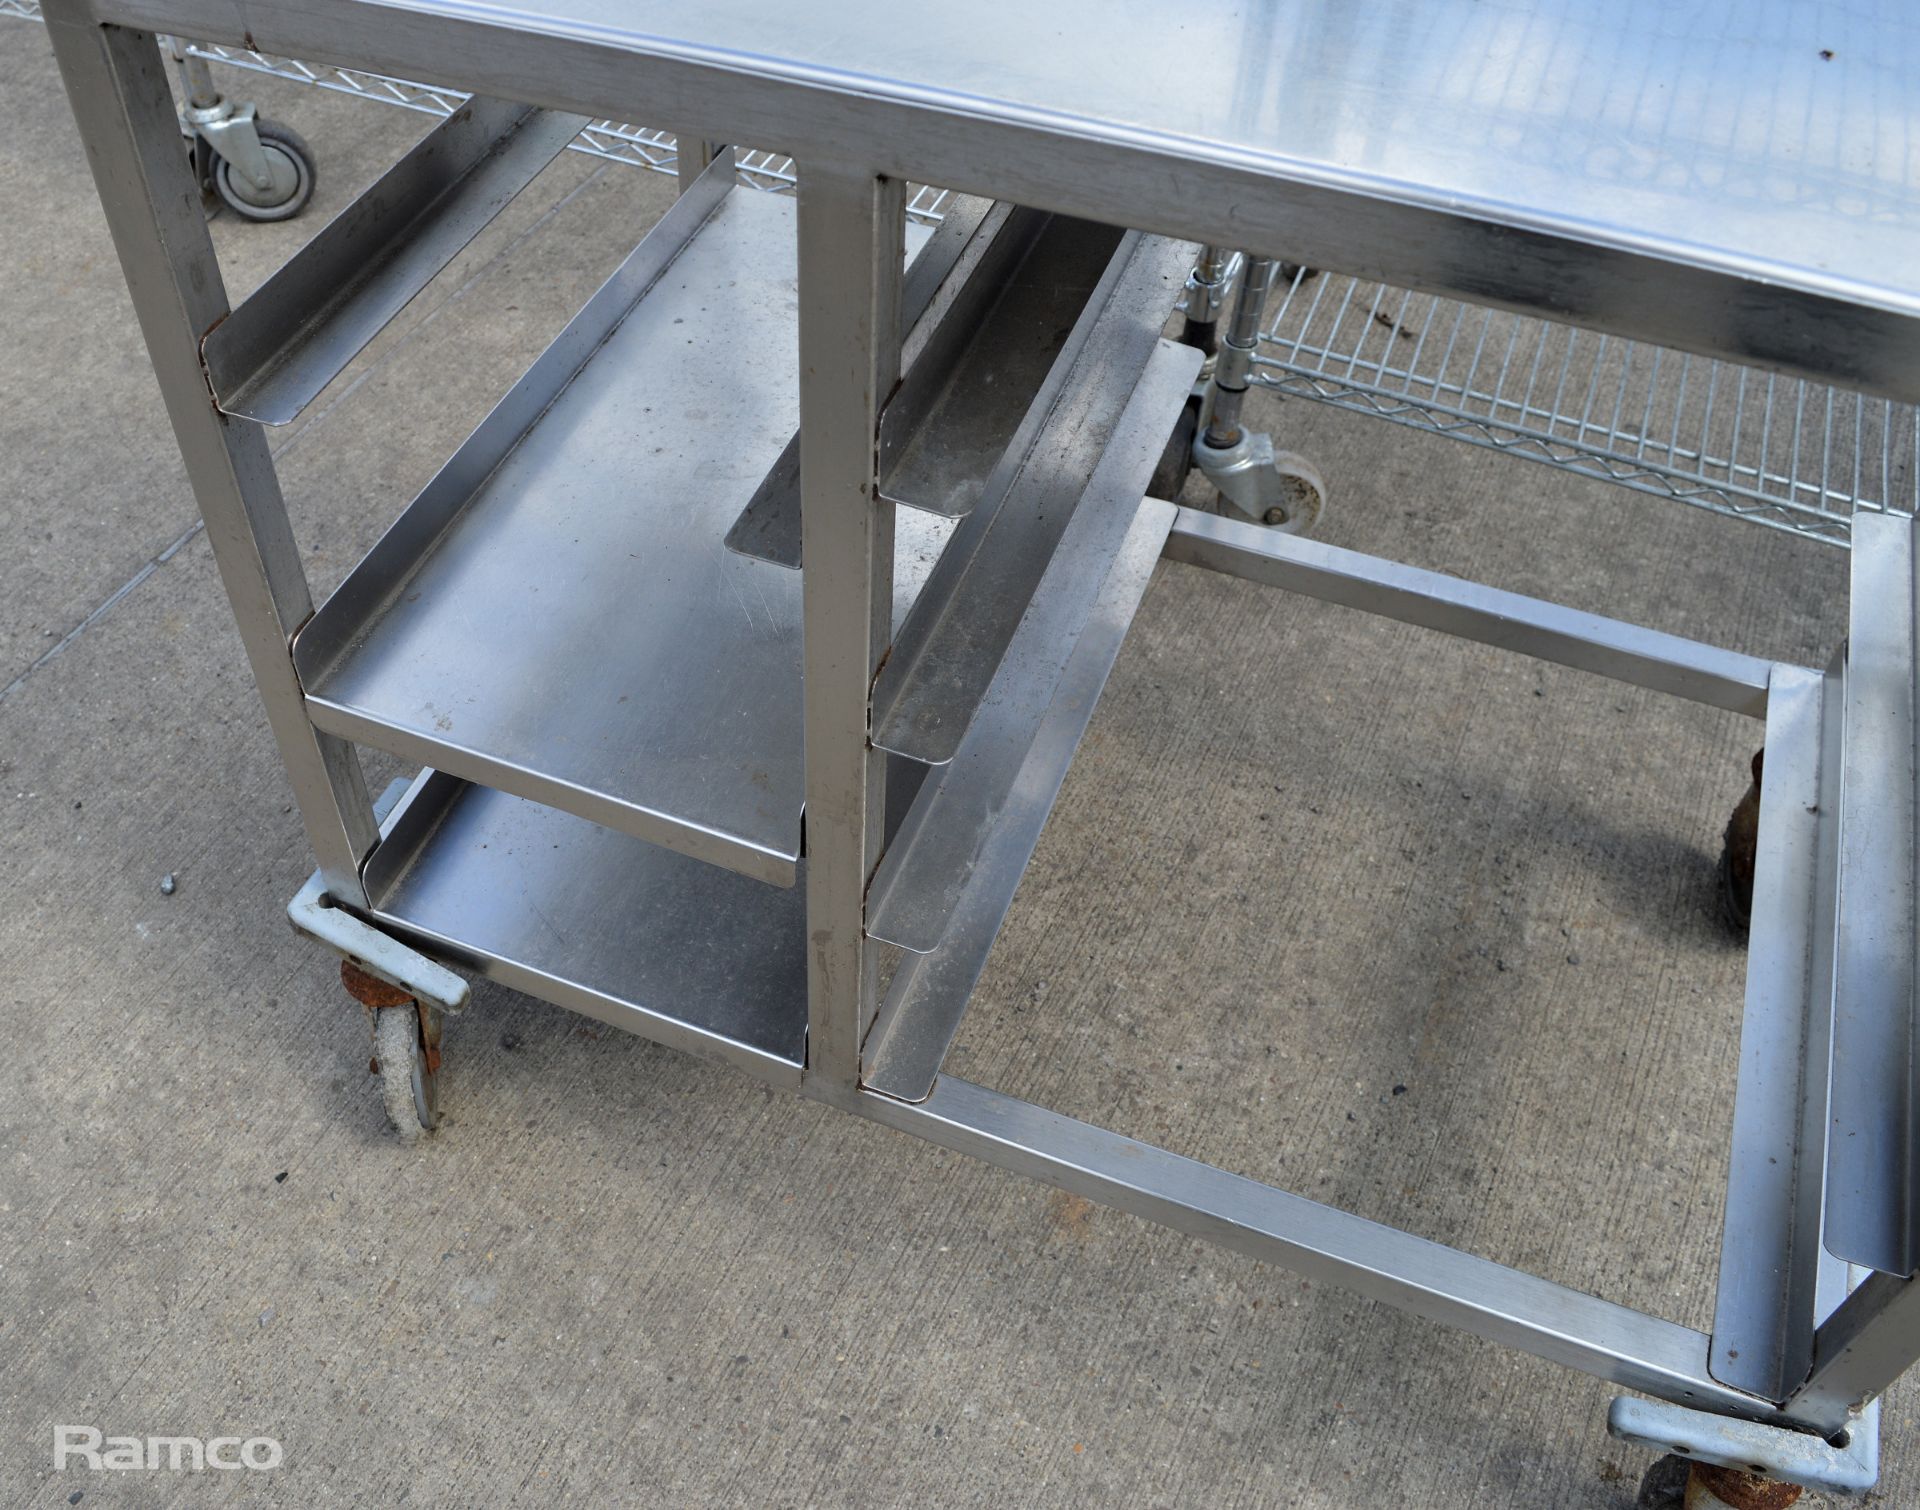 Catering trolley with 7x tray storage L 93 x W 59 x H 95 cm - Image 5 of 5